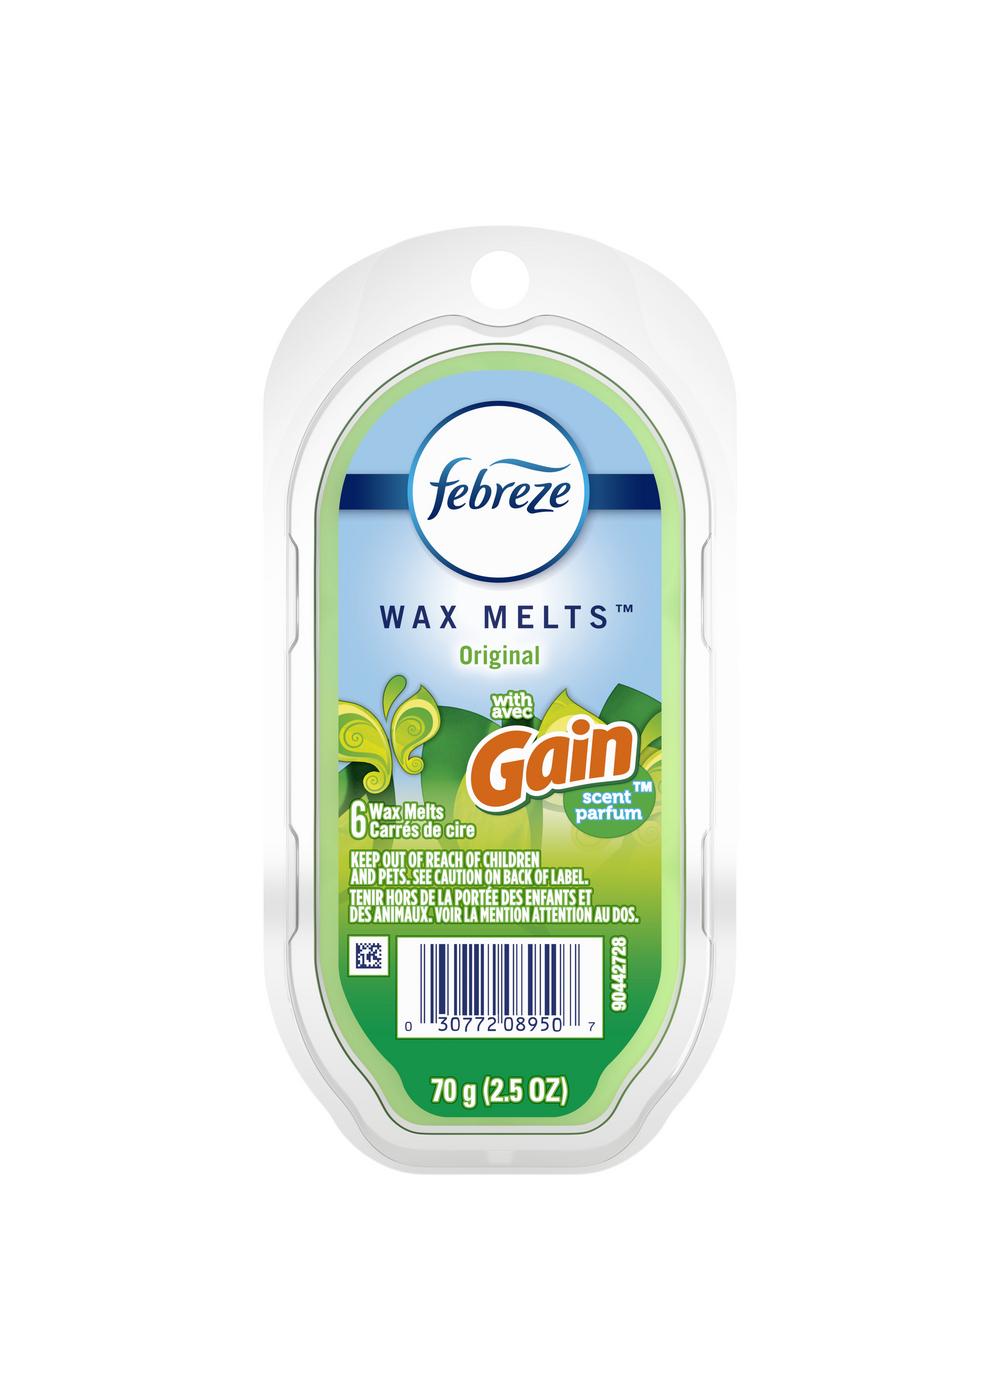 Febreze WAX MELTS Air Freshener with Gain Original (1 Count, 2.75 oz) (  pack of 2)